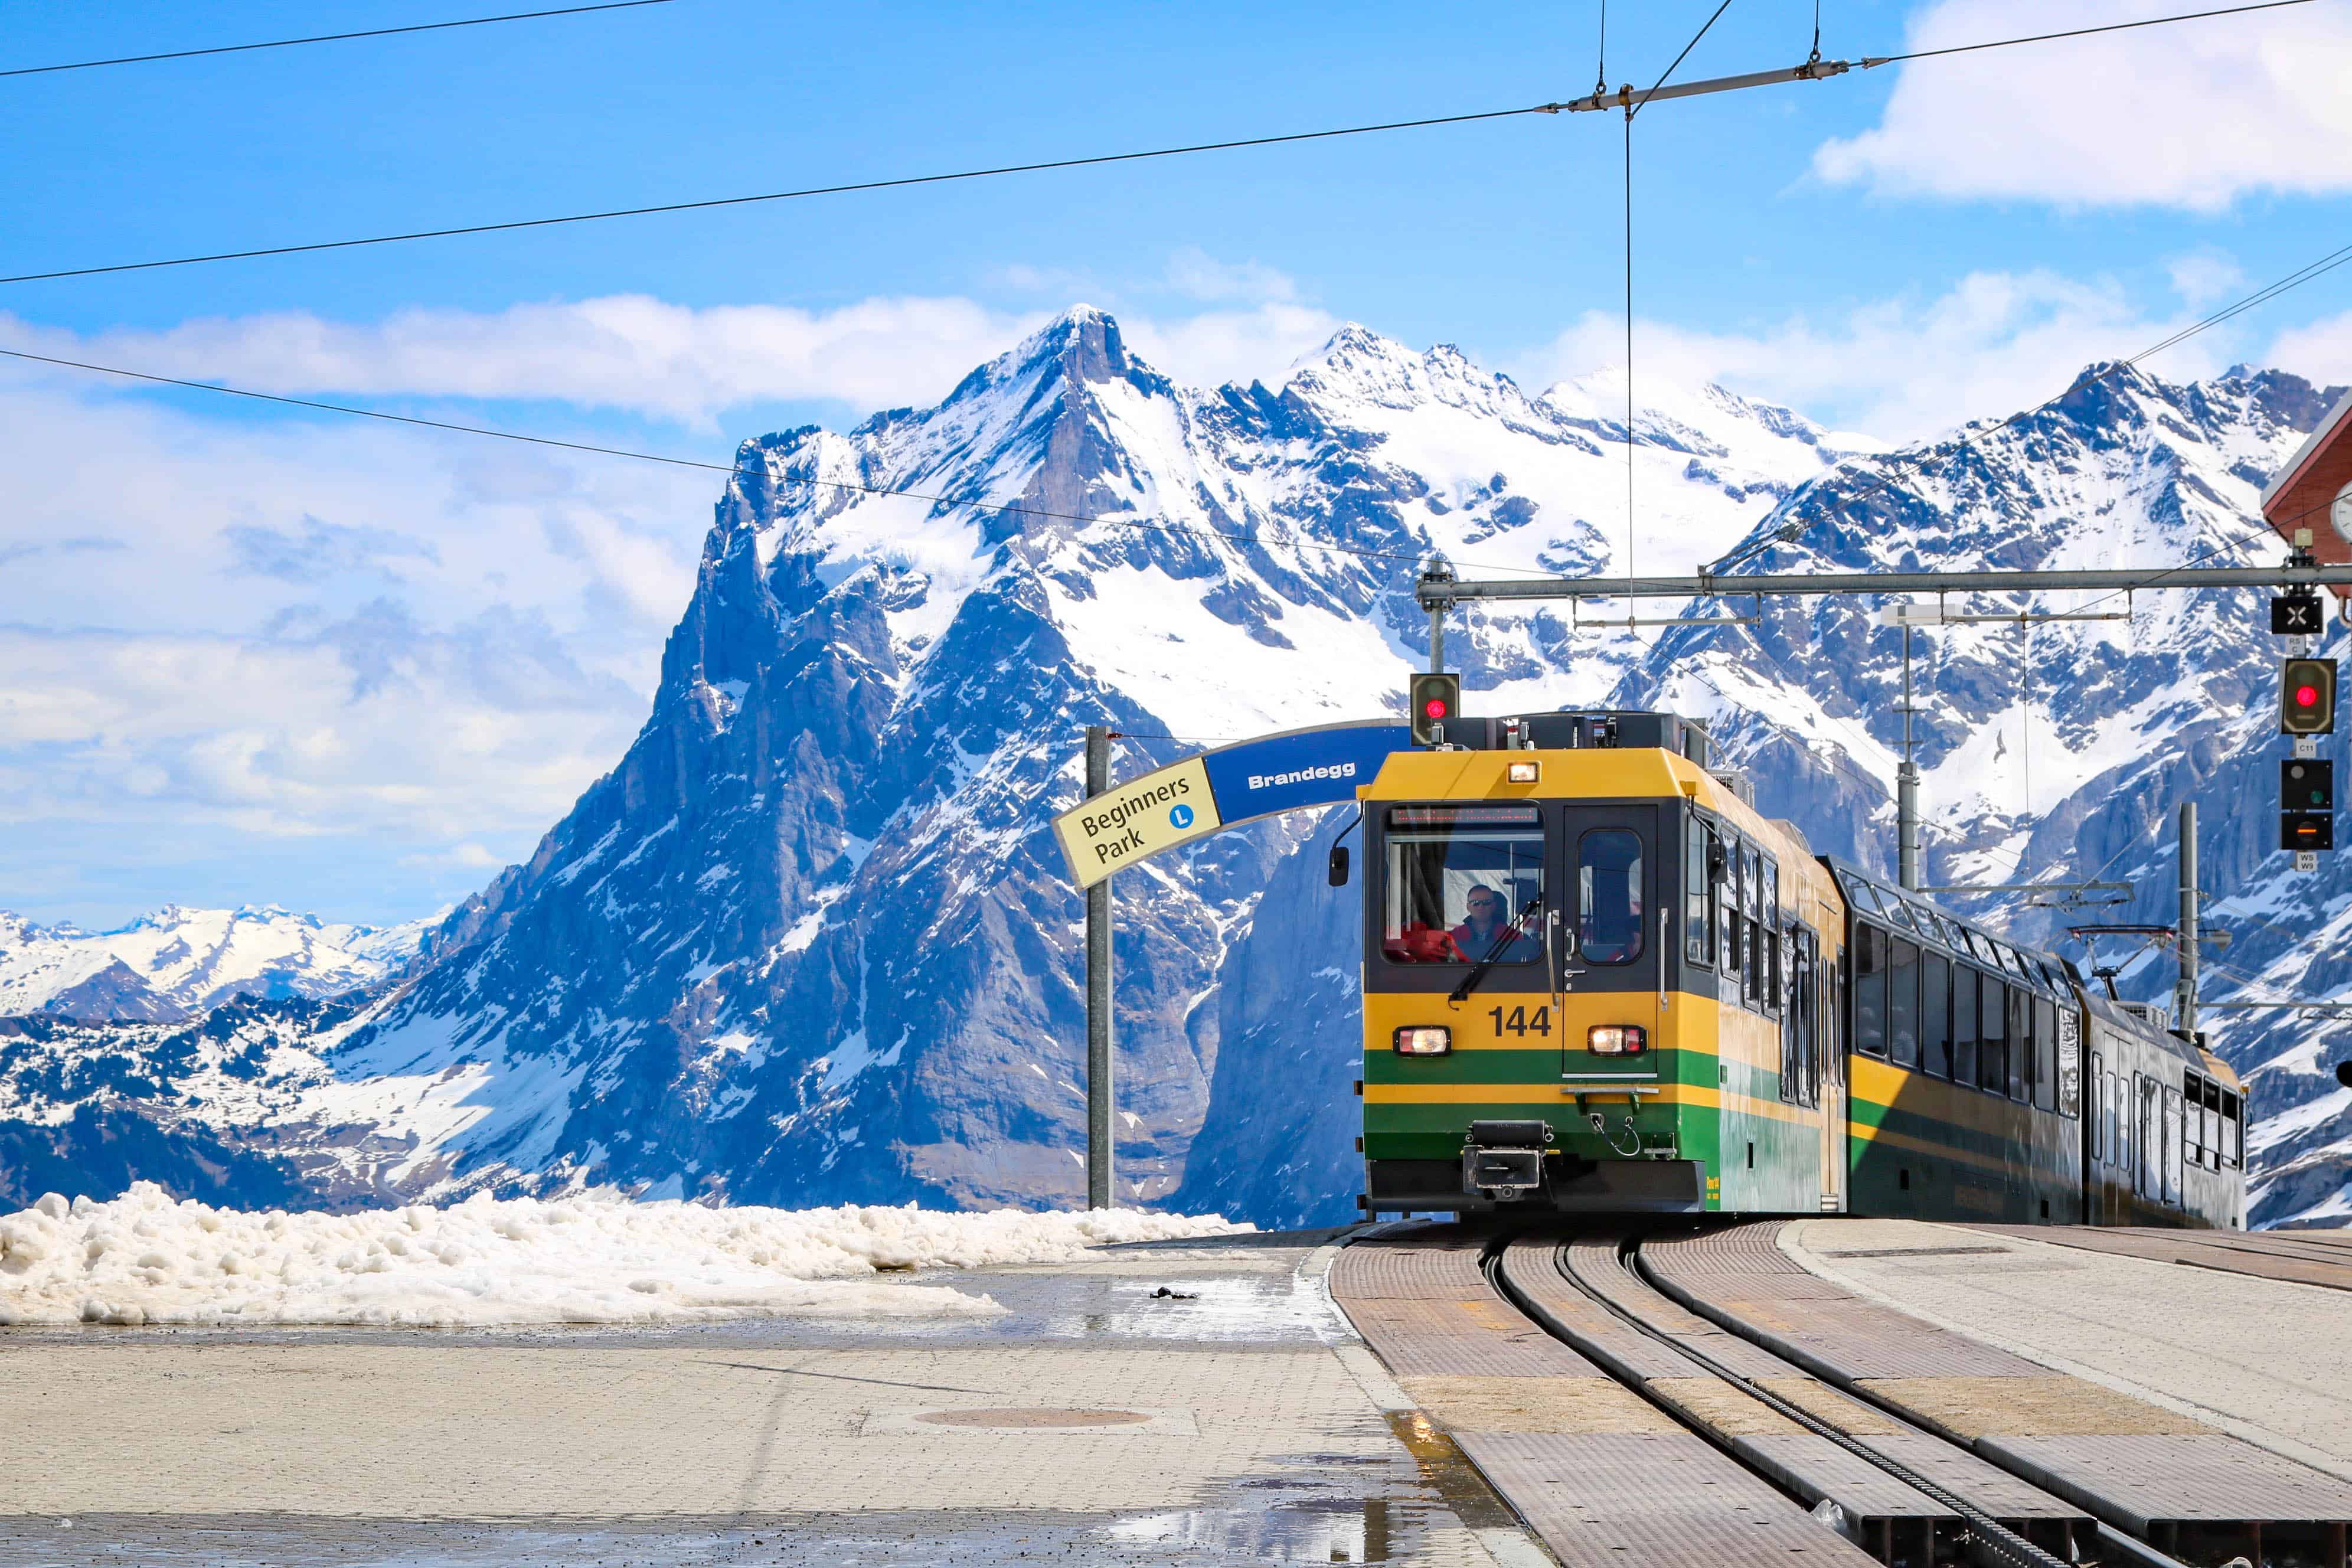 A scenic train ride to Jungfraujoch - Top of Europe